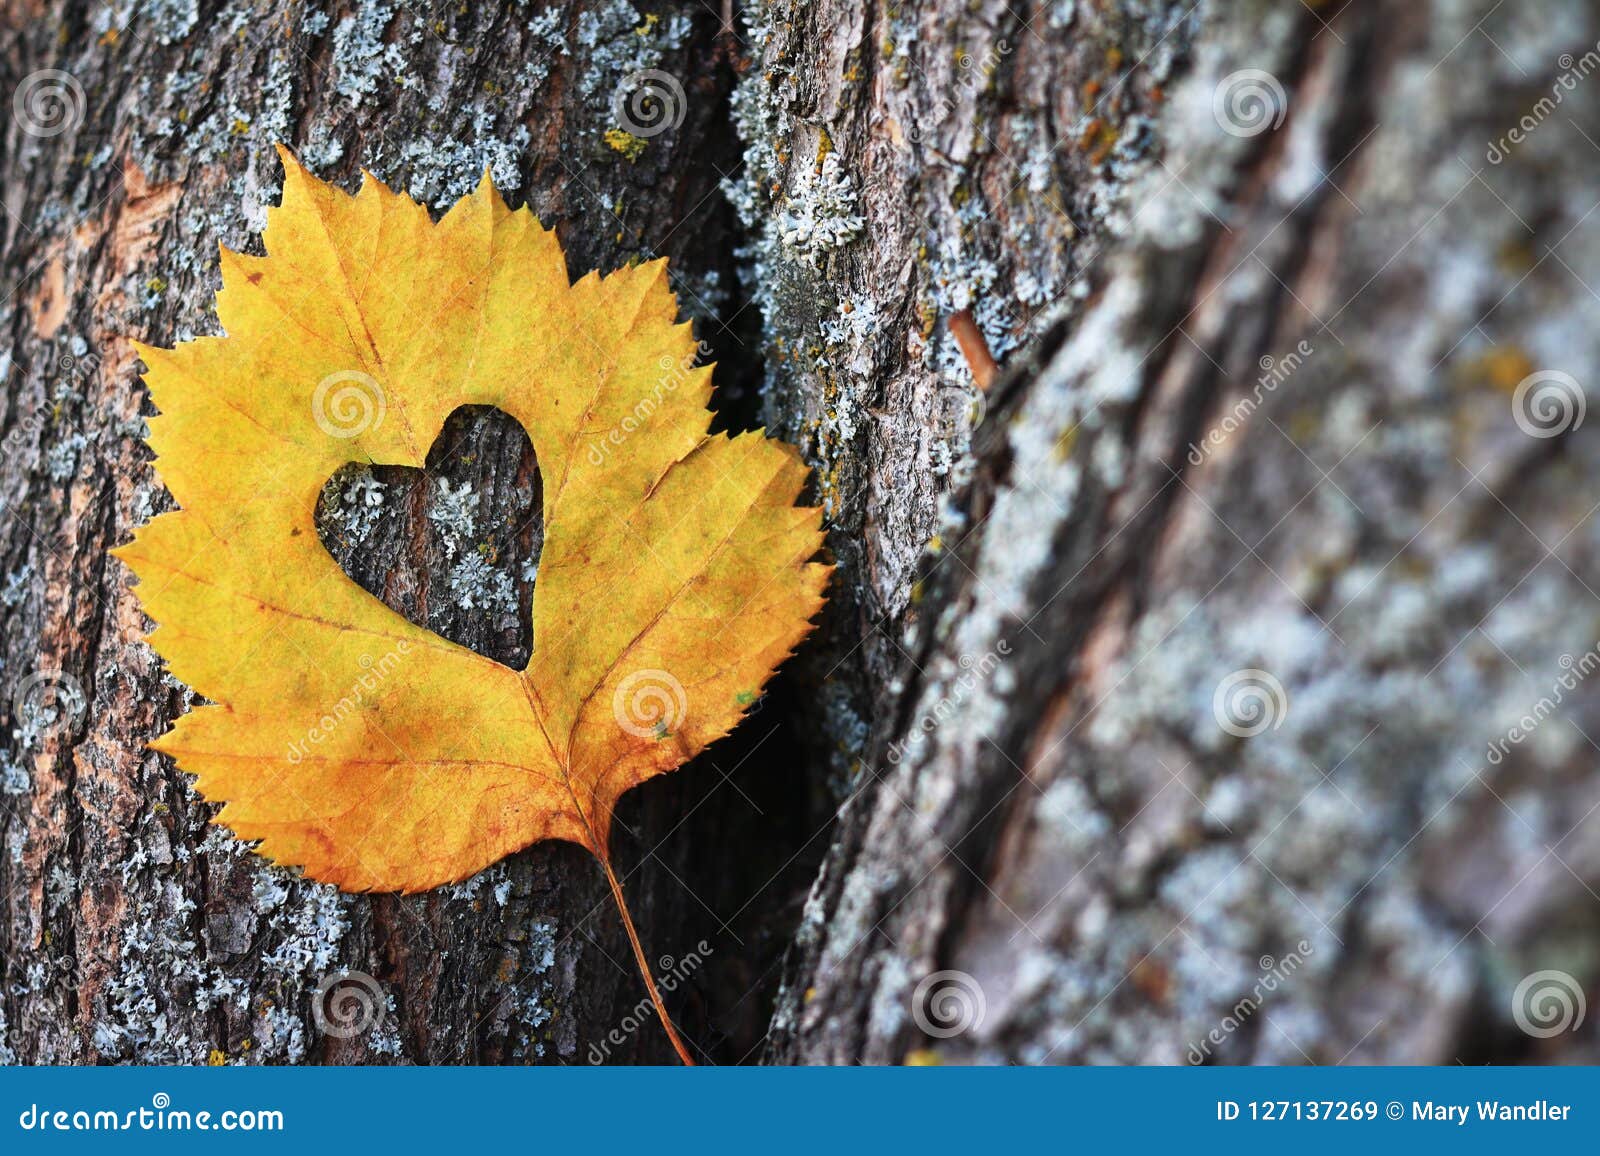 Yellow Autumn Leaf Laying Against the Bark of a Tree Stock Image ...